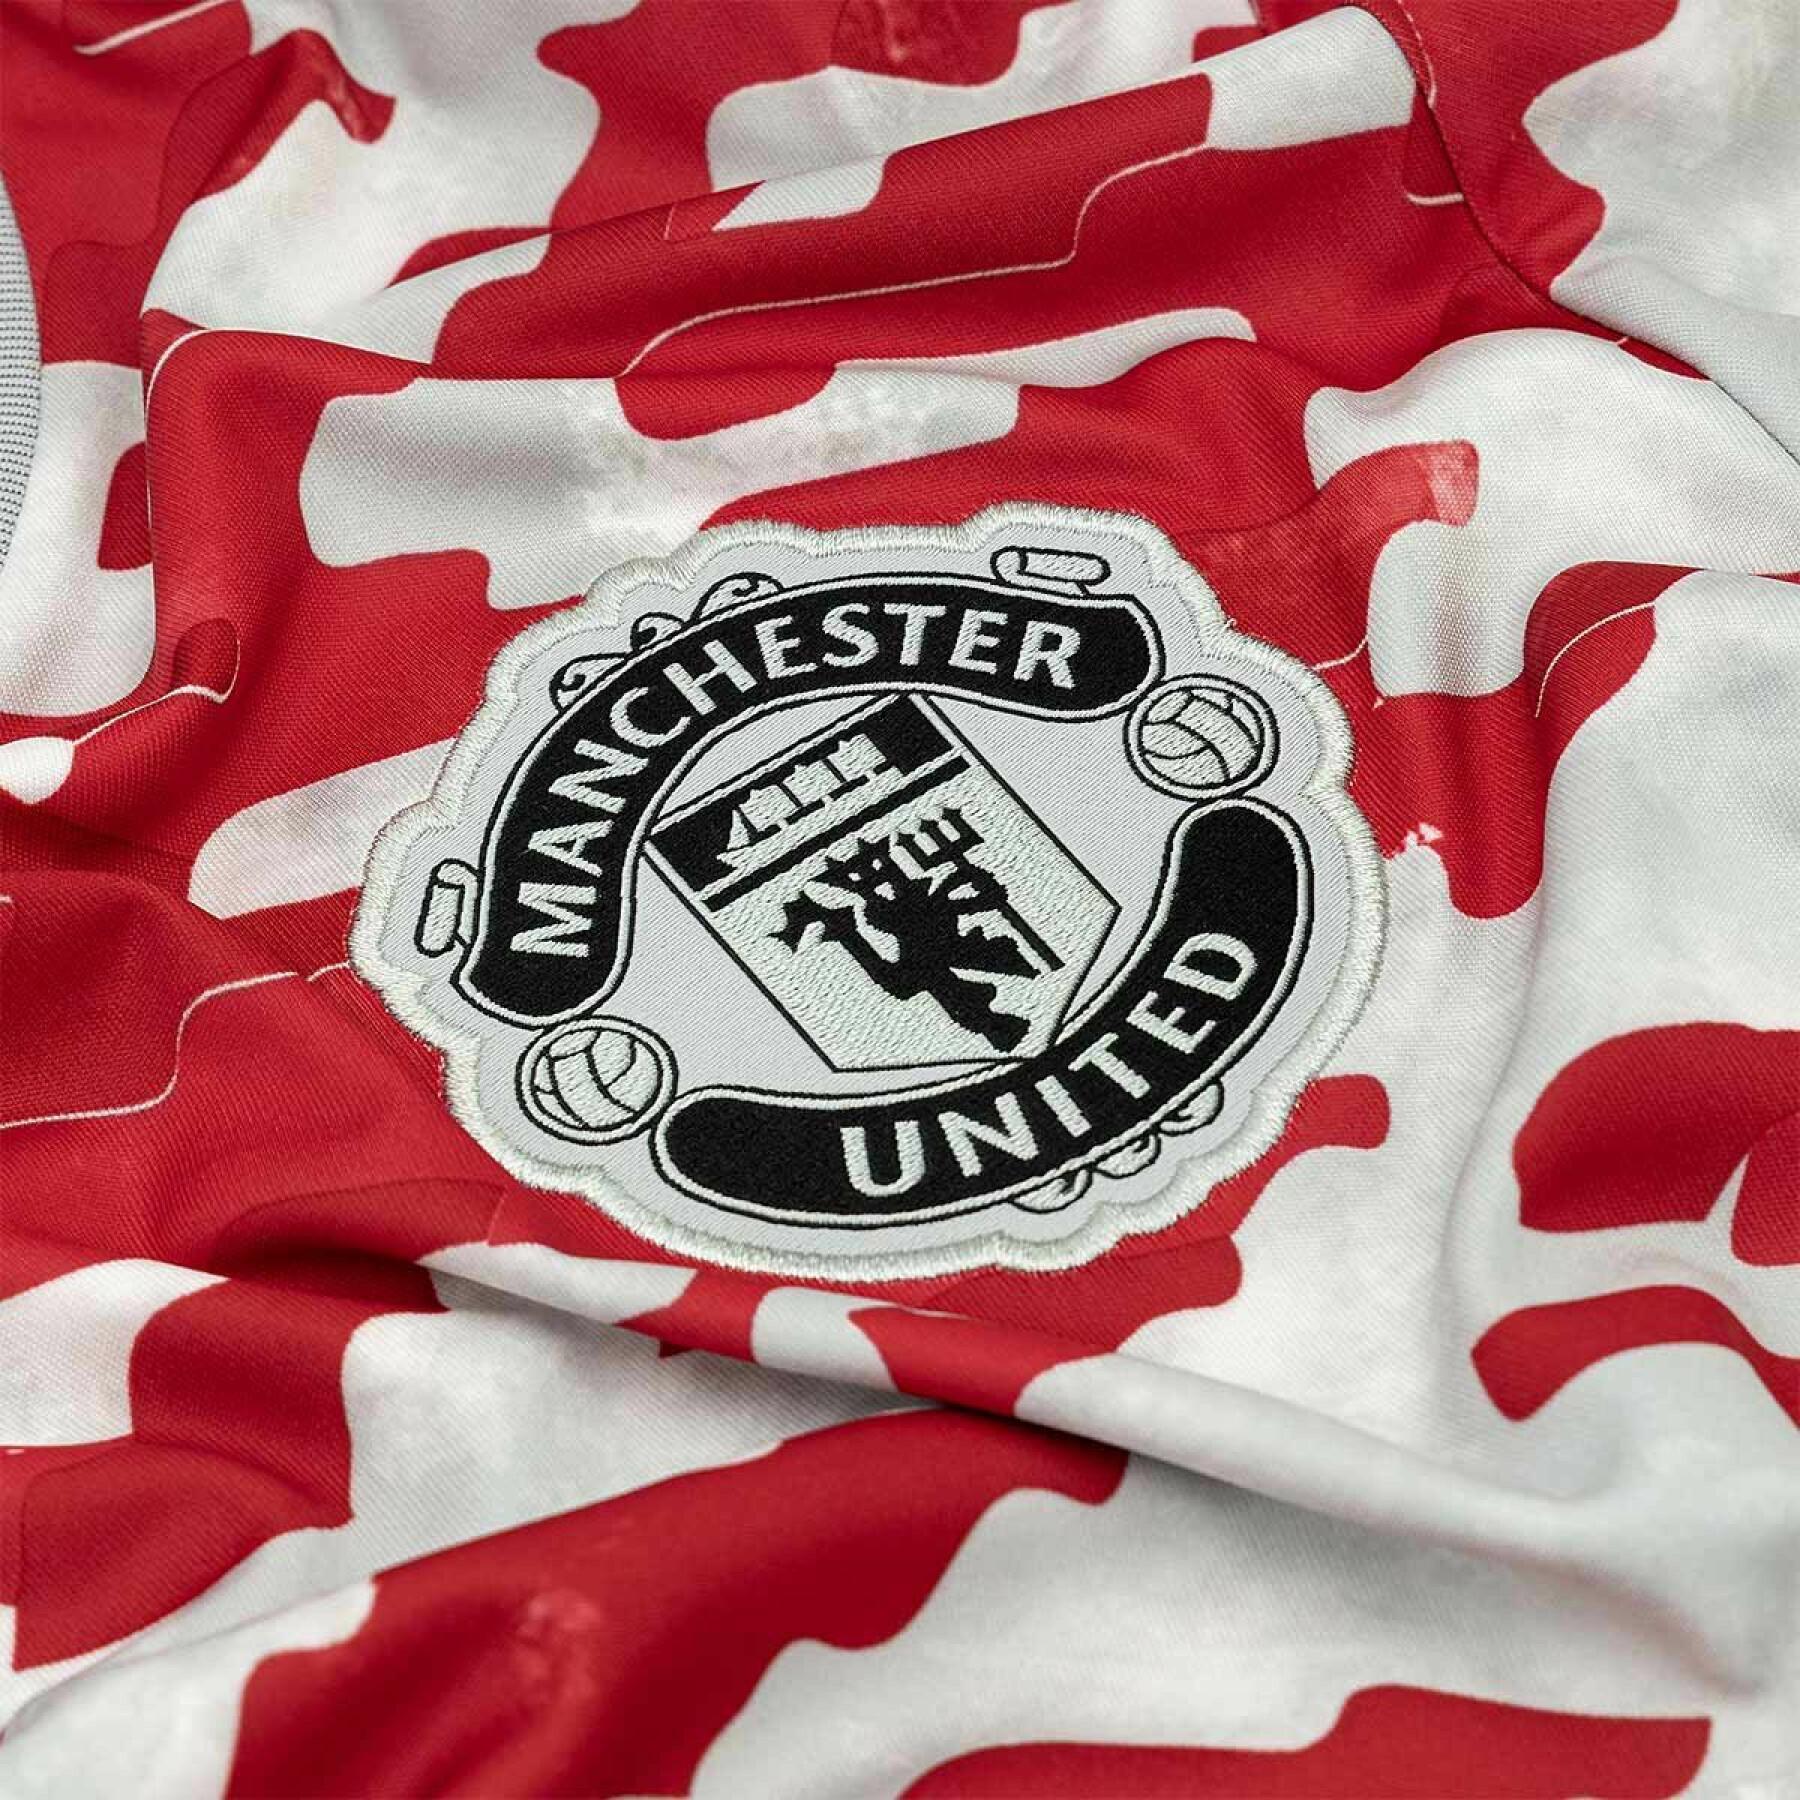 Warm-up jersey Manchester United 2021/22